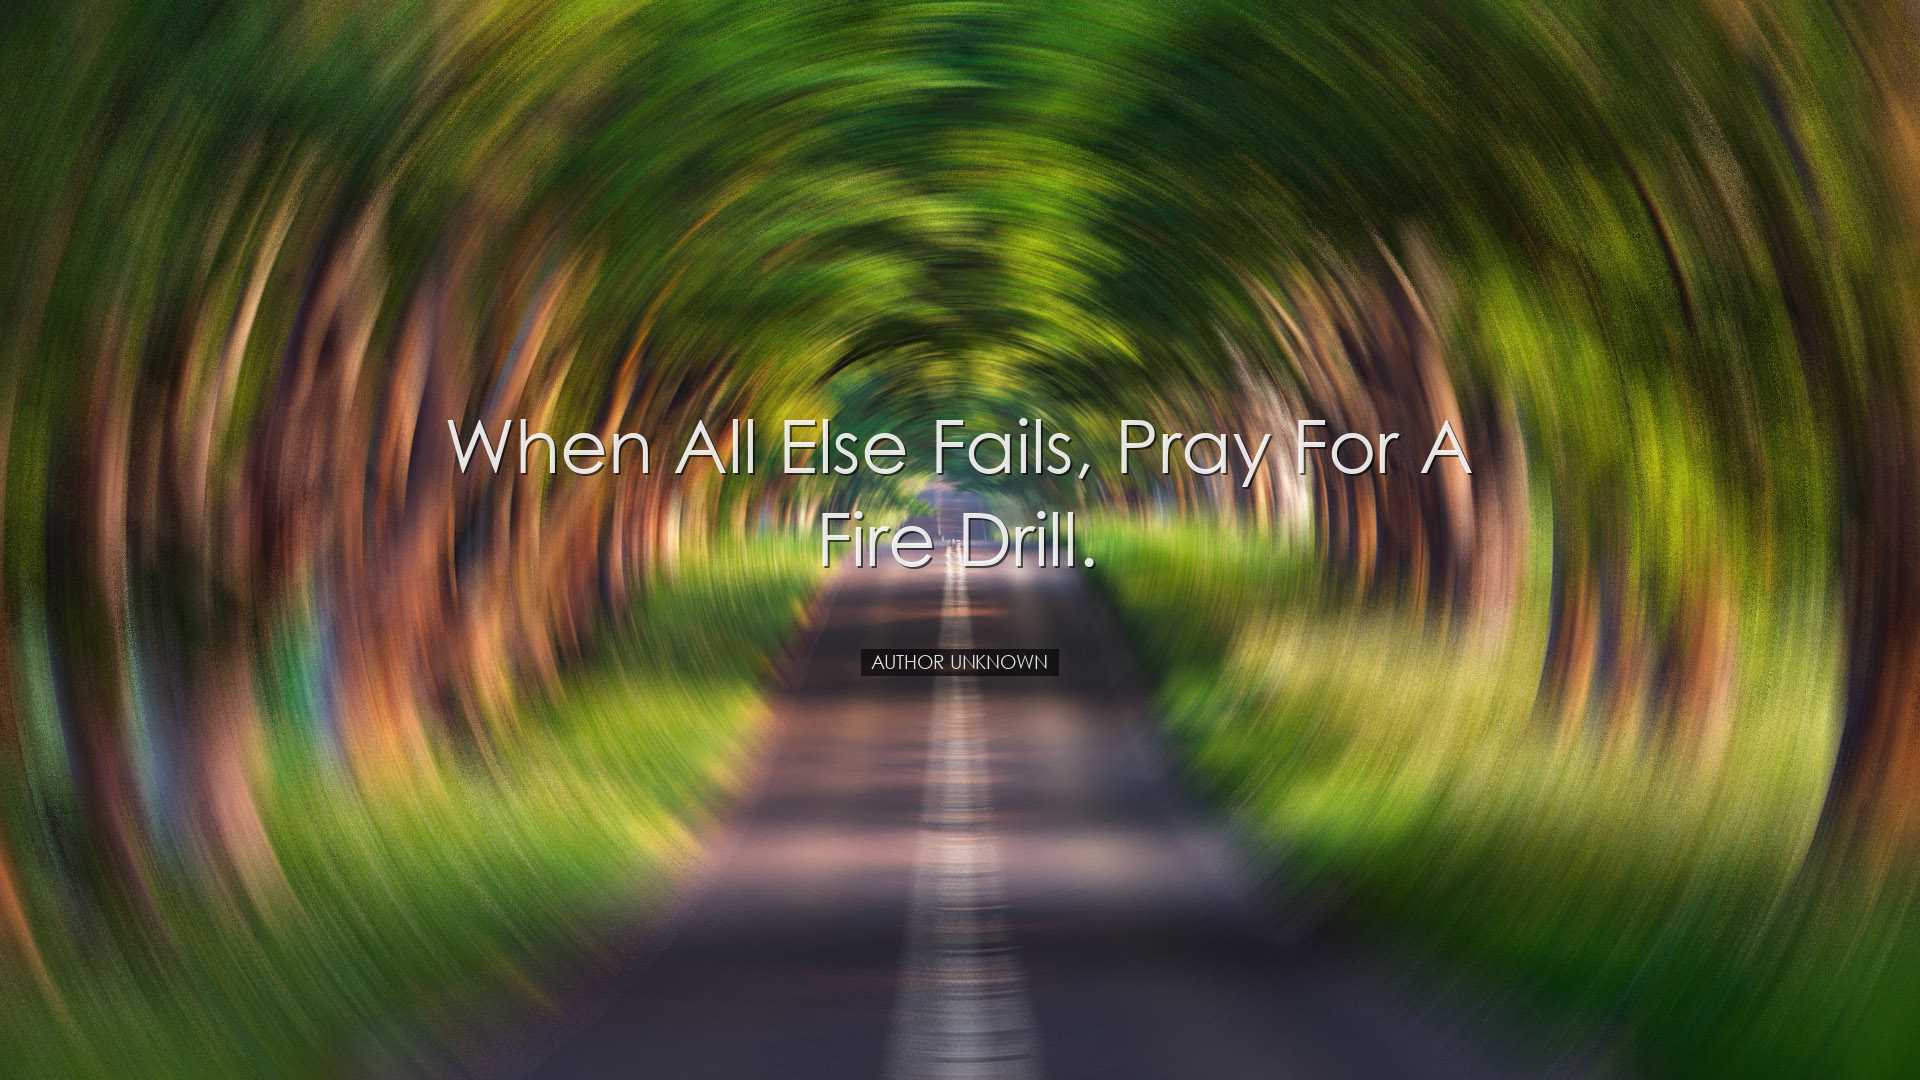 When all else fails, pray for a fire drill. - Author Unknown